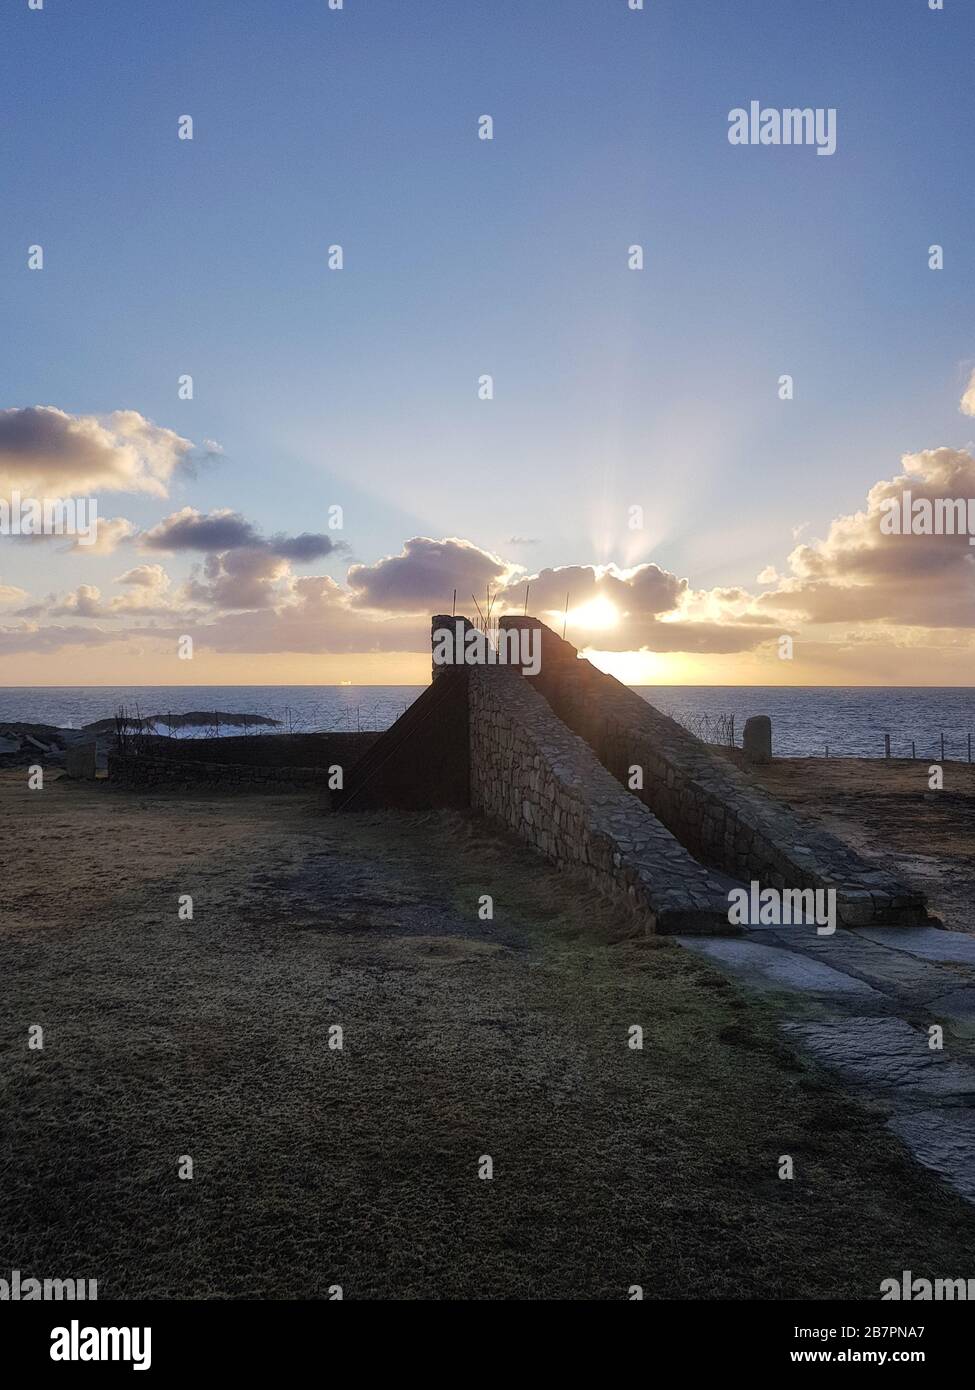 Dun na mBo Prehistoric Fort at Belmullet in County Mayo - Ireland Stock Photo